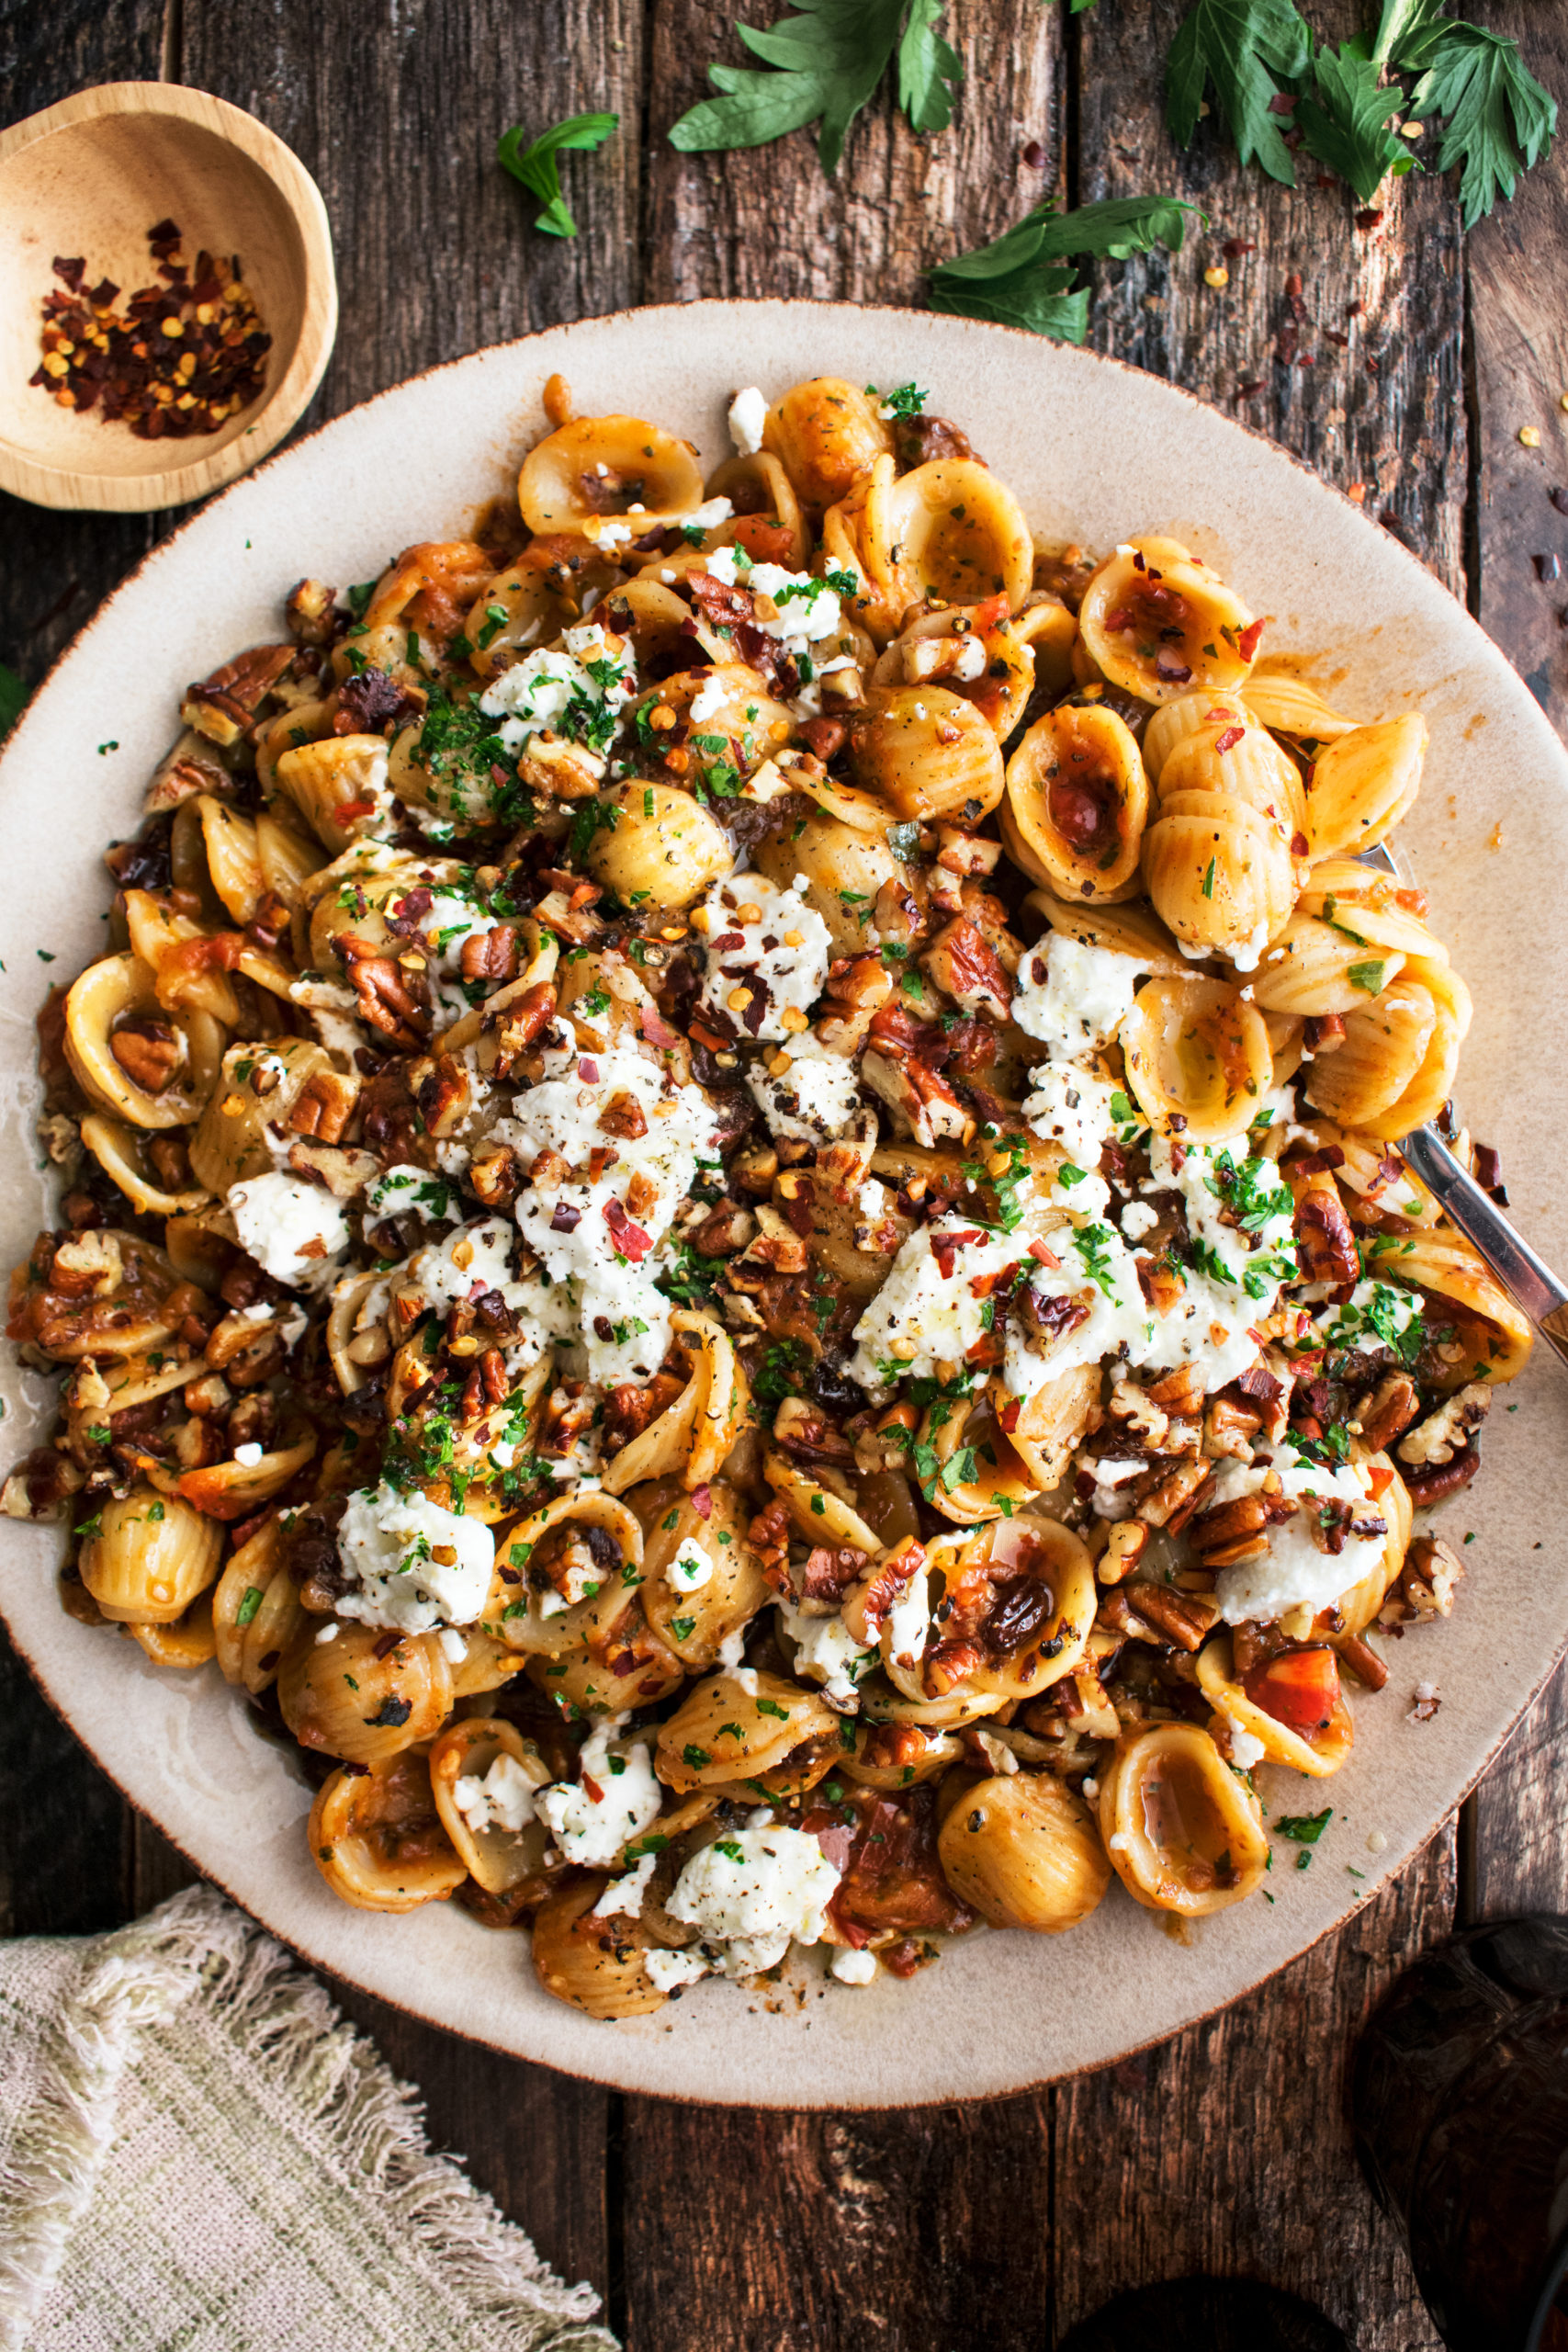 Charred Eggplant Pasta with Tomatoes & Goat Cheese - The Original Dish